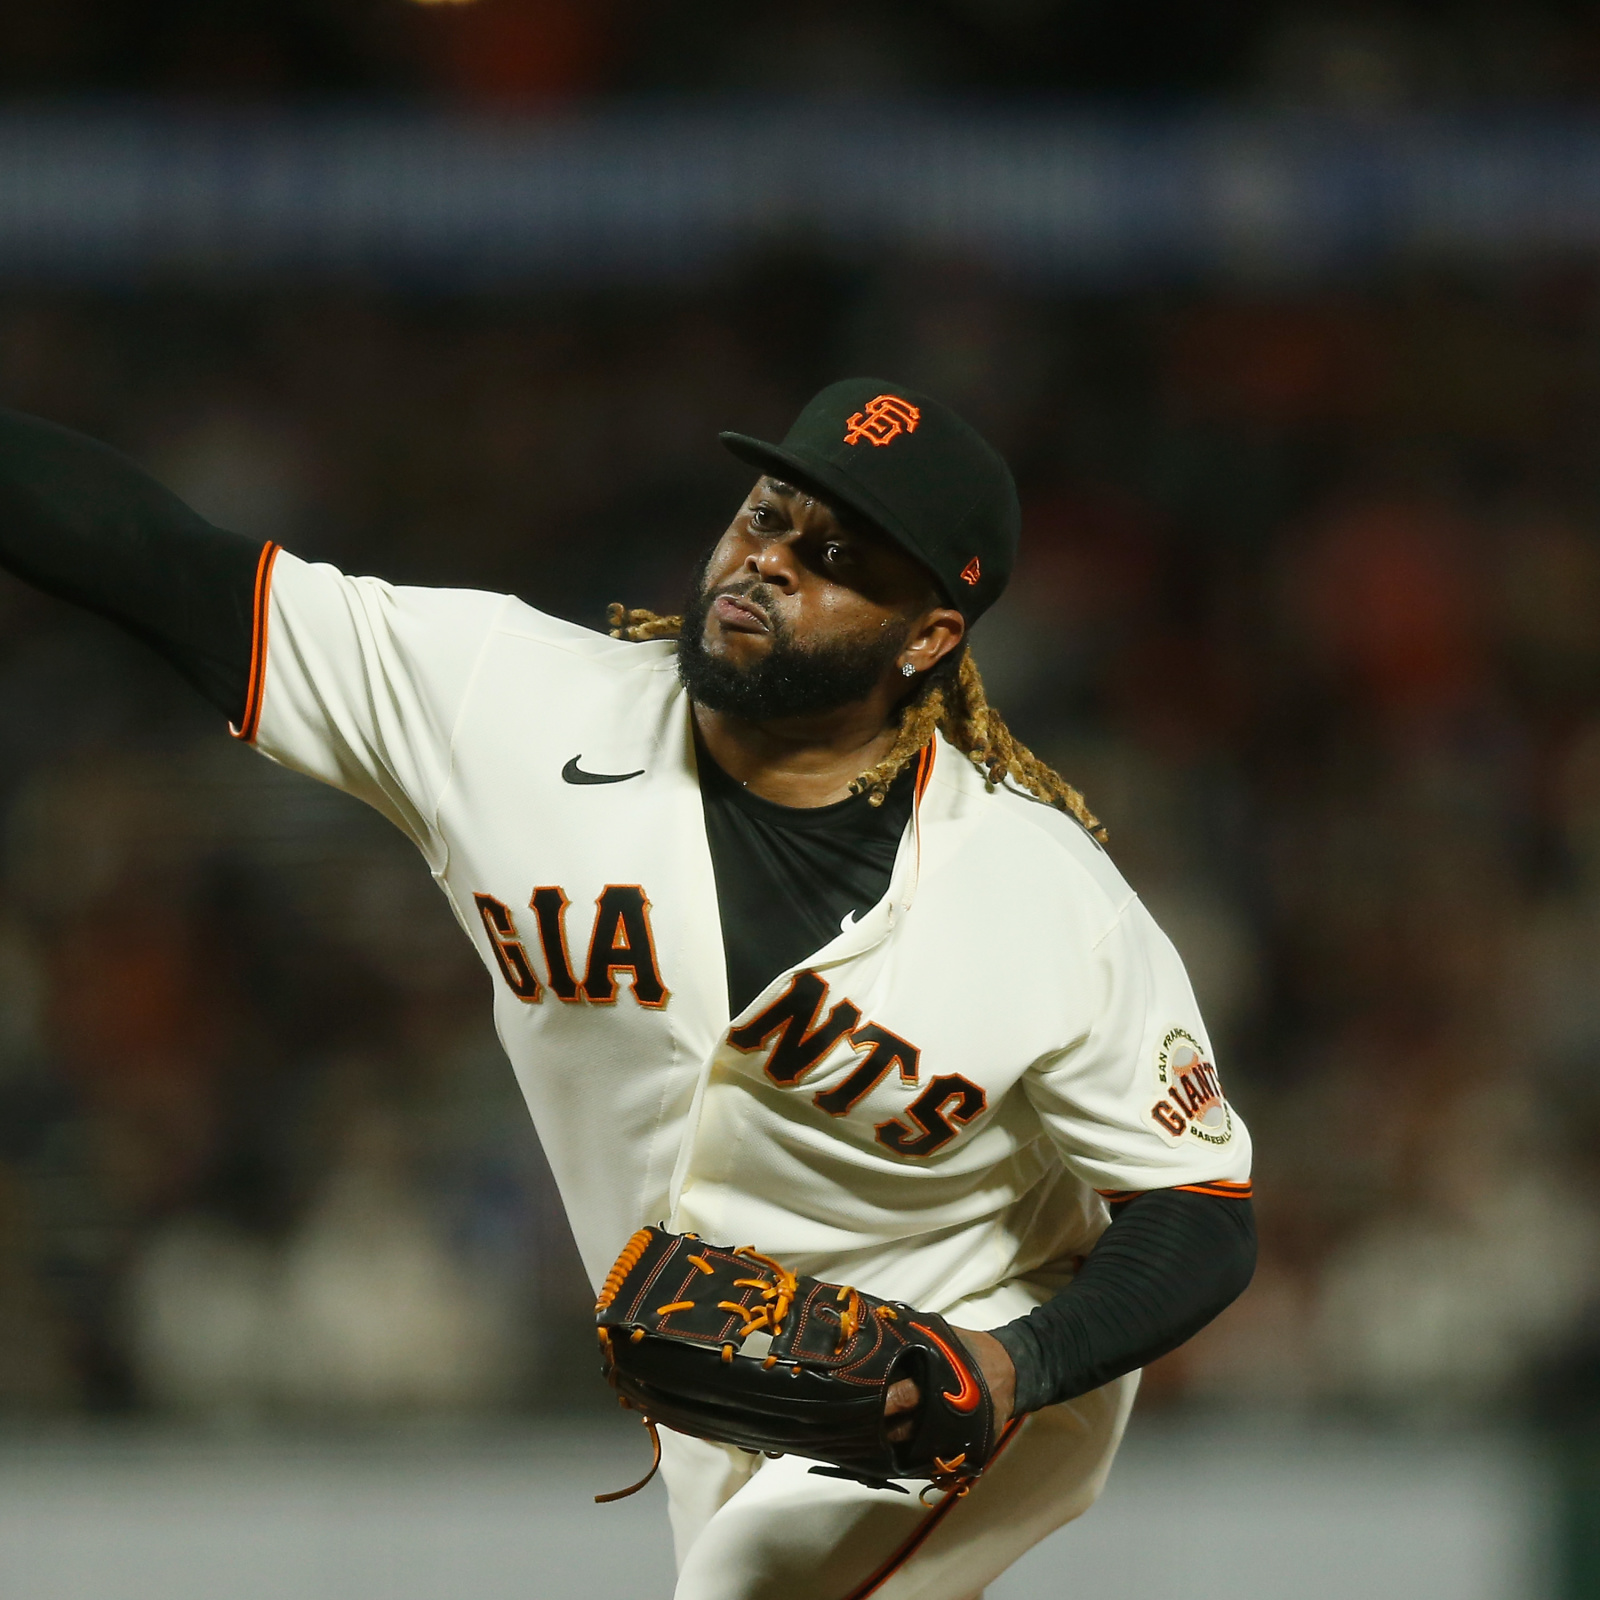 The Giants paid a nice tribute to Johnny Cueto on Friday